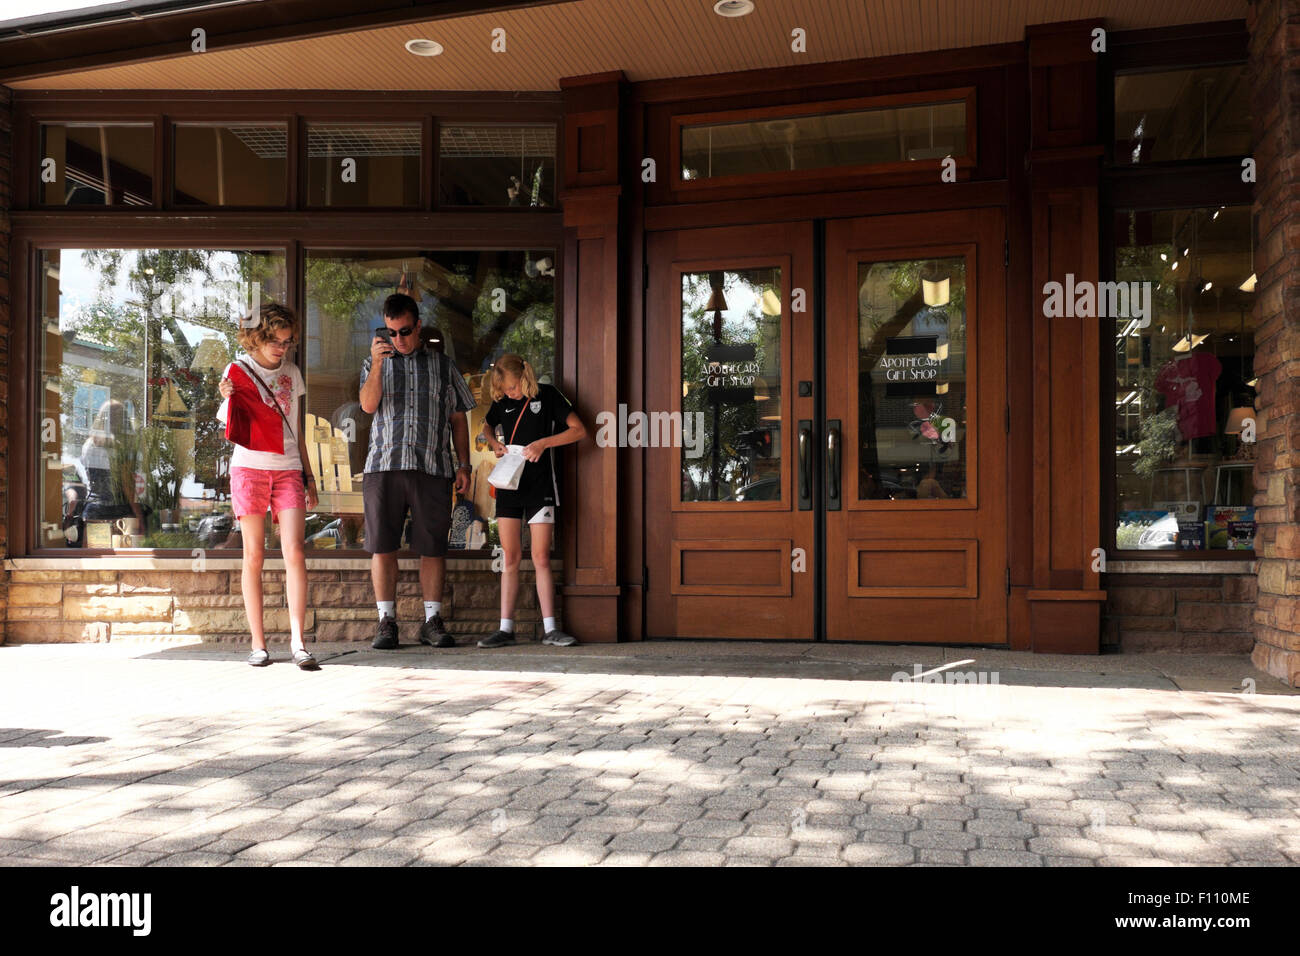 Father, accompanied by his daughters, checks his cell phone outside the Apothecary Gift Shop in downtown Holland, Michigan, USA. Stock Photo